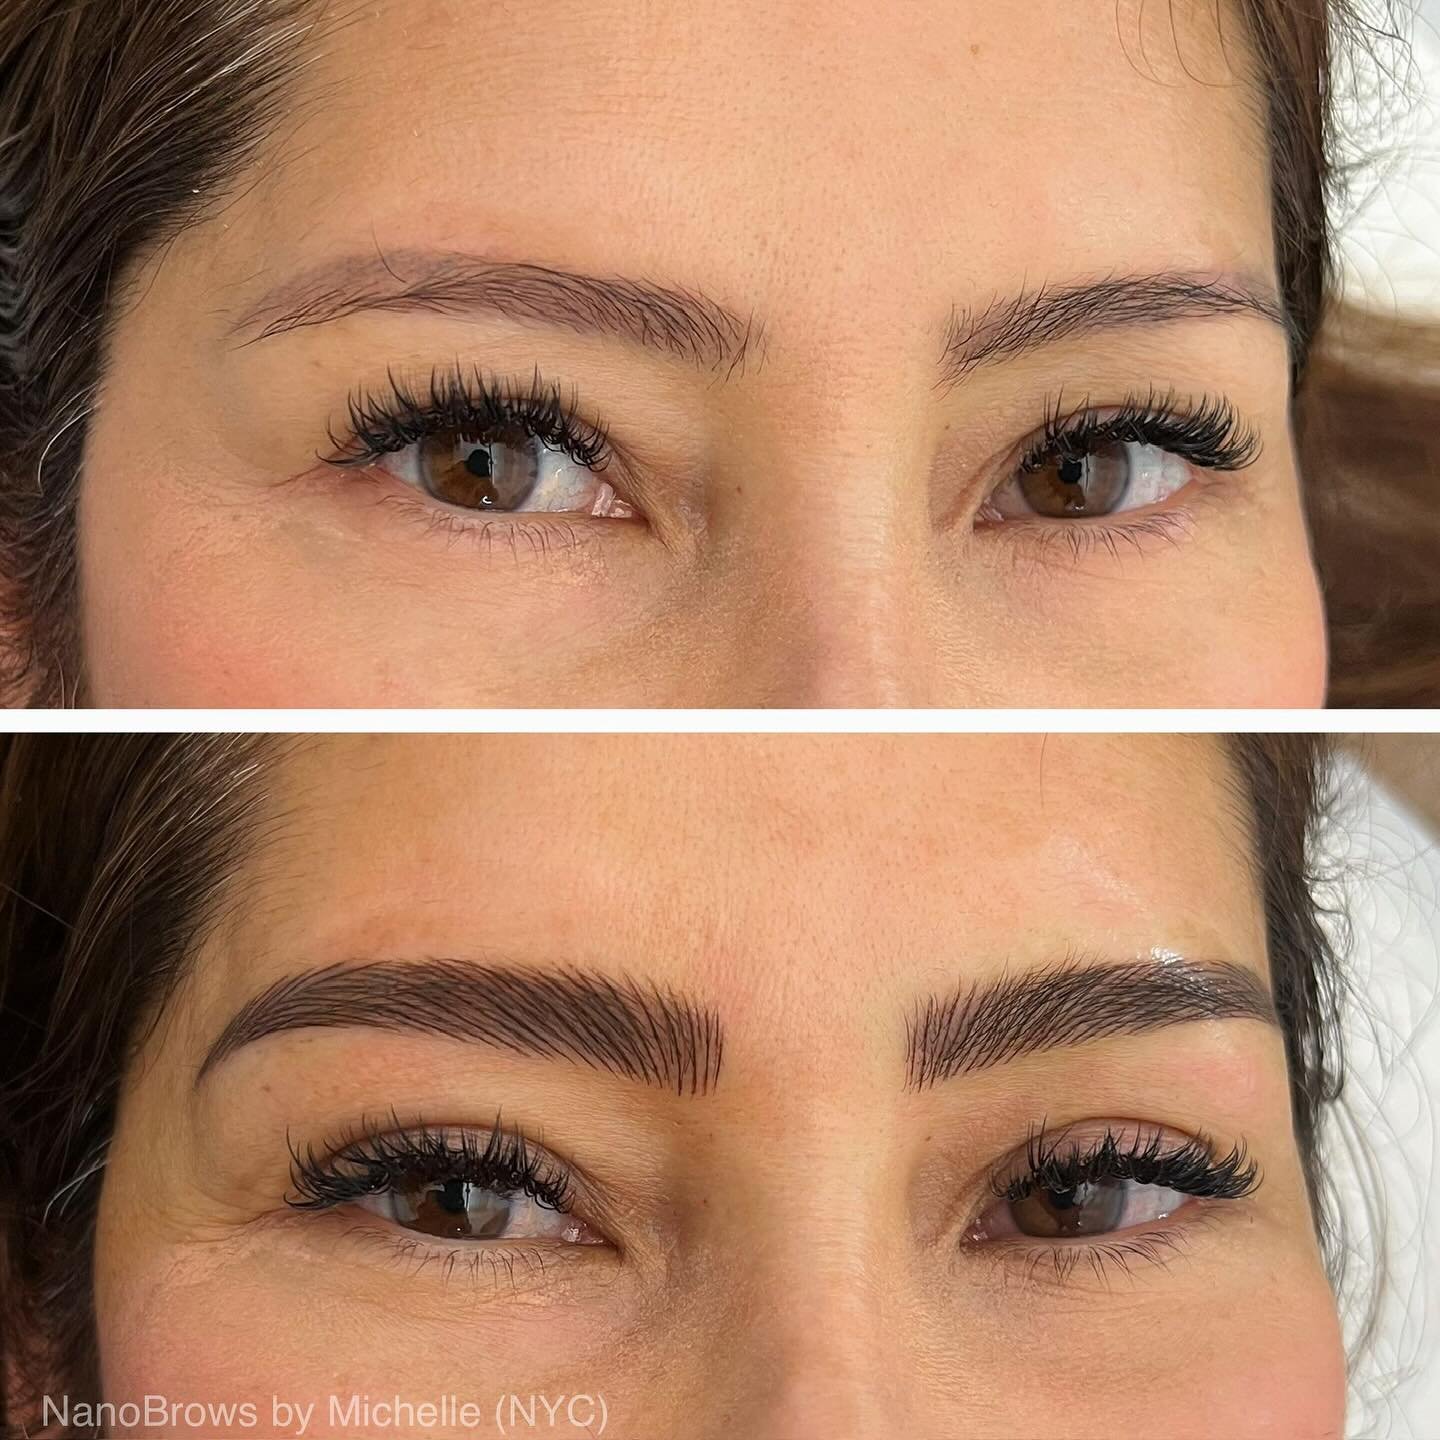 NanoBrows! Beautiful natural-looking brow hair strokes are created using a single fine needle, for the utmost in realism. This is our most advanced and gentlest treatment. 
.
The single fine needle also results in minimal invasiveness: no bleeding, v